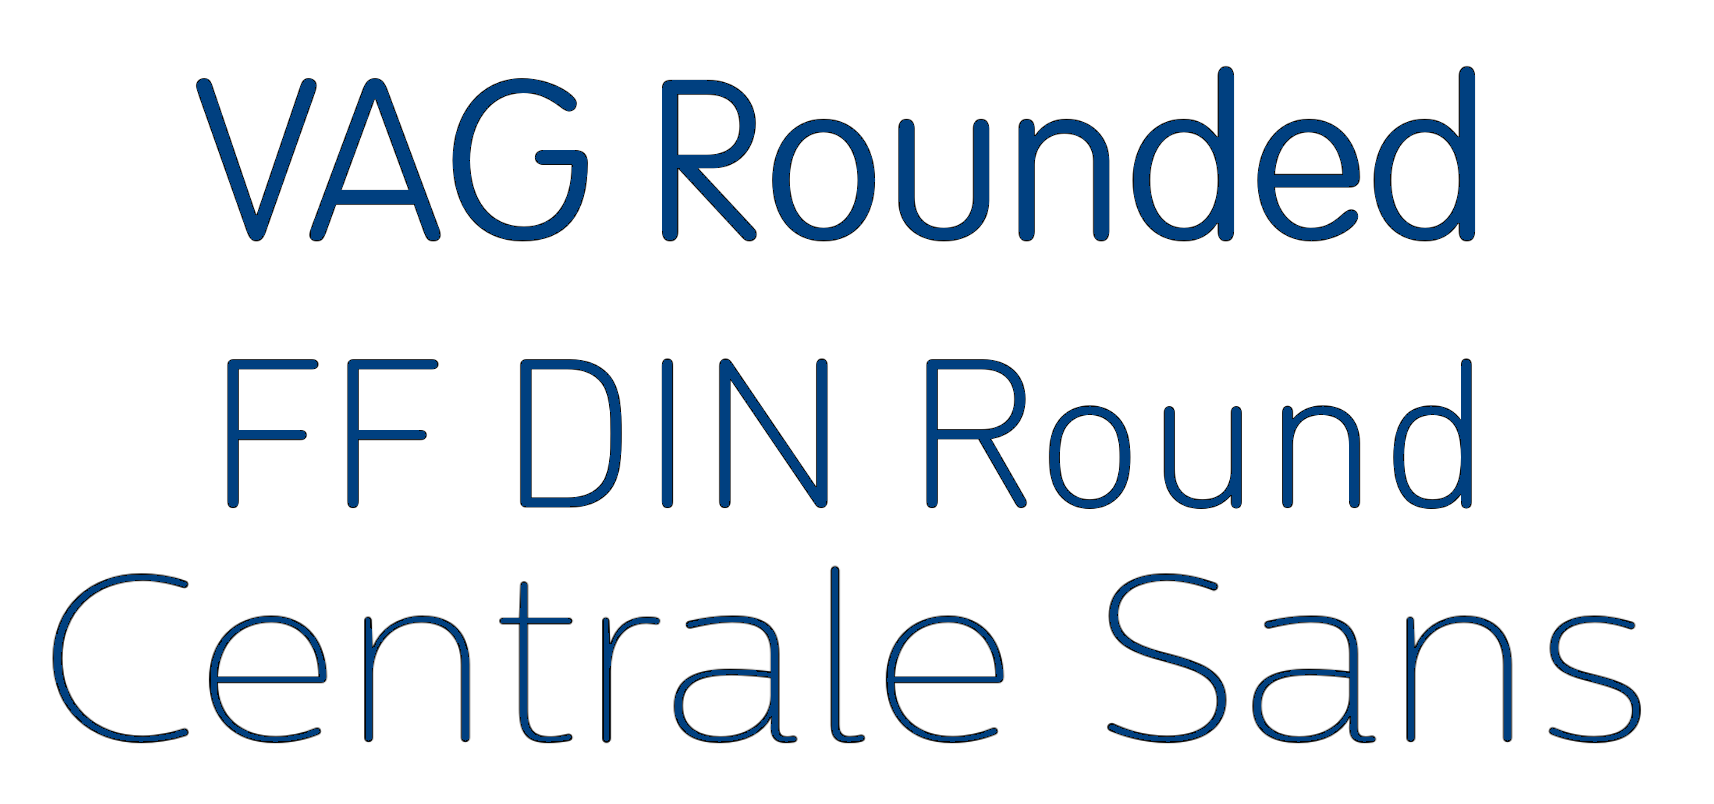 Examples of rounded sans serifs